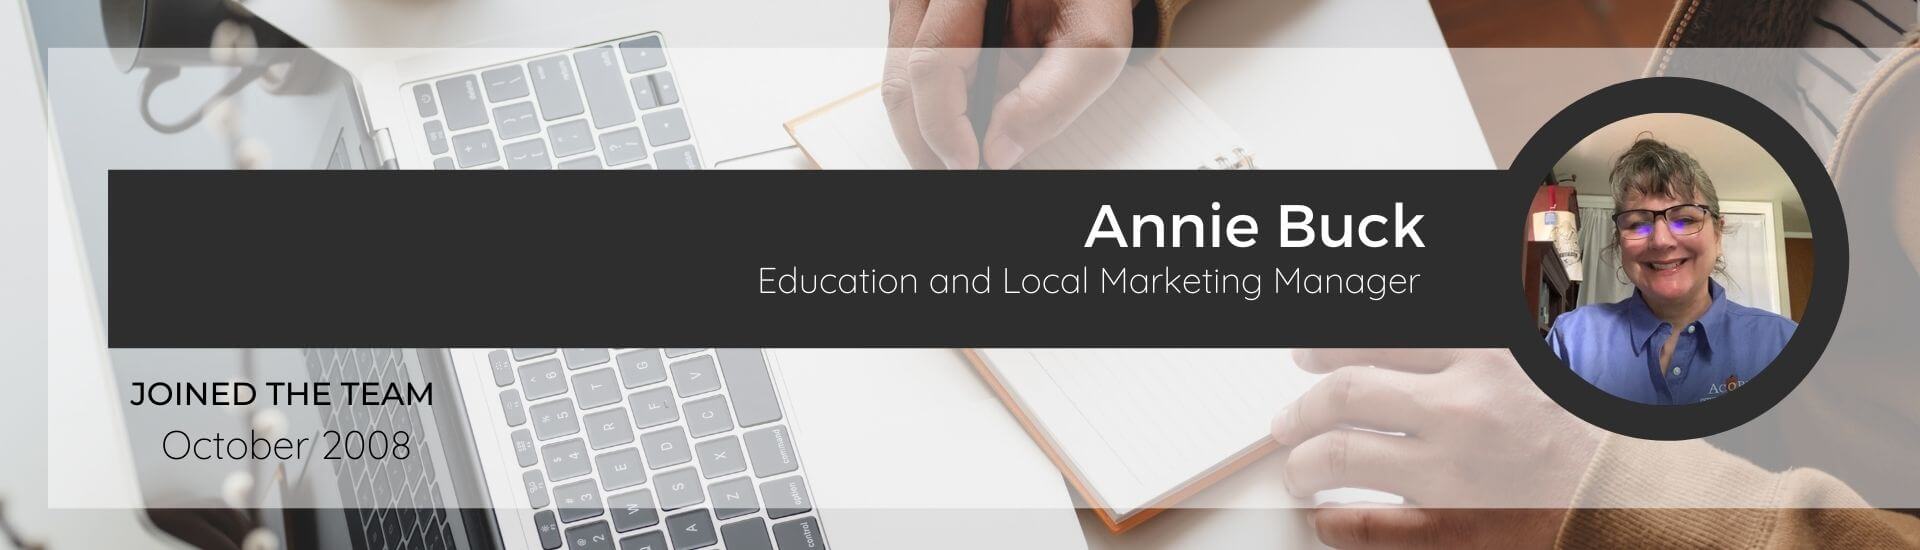 Annie Buck, Education Manager for Acorn Marketing, on a background of a person working on a laptop and notebook.